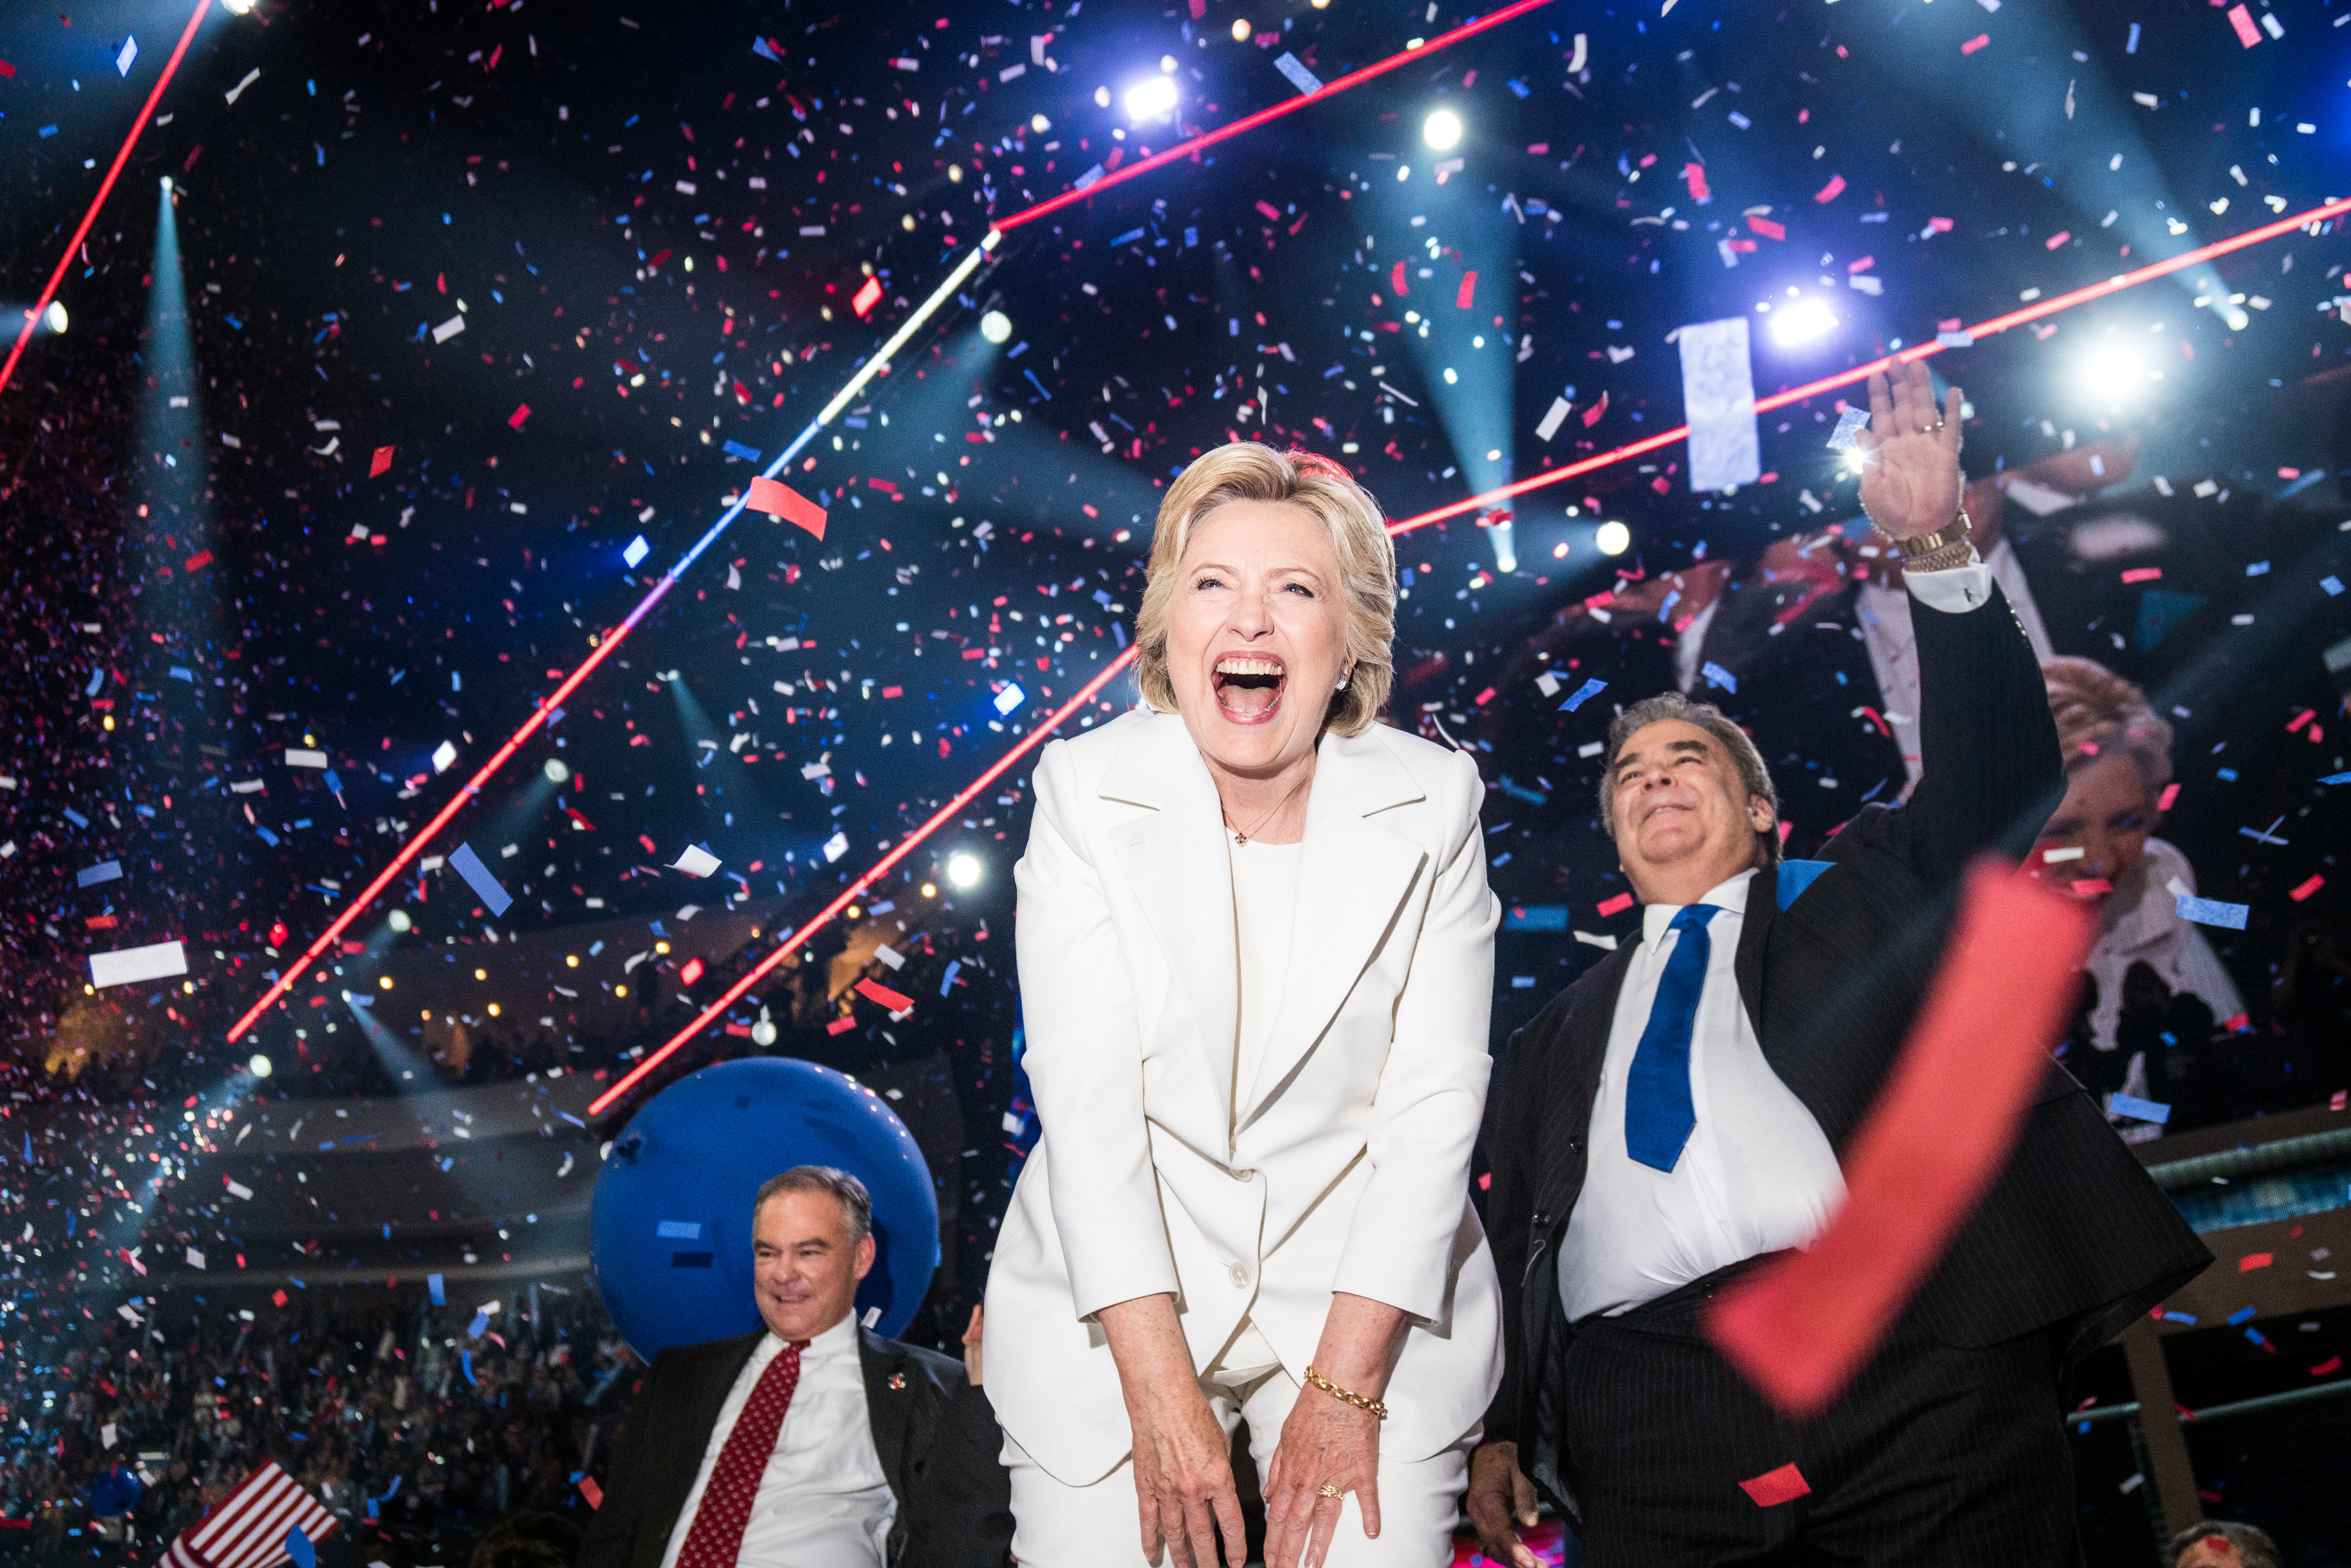 An ecstatic Hillary Clinton celebrates at the conclusion of the Democratic National Convention where she accepted the nomination on Thursday, July 28, 2016 in Philadelphia. (Ben Lowy for TIME)